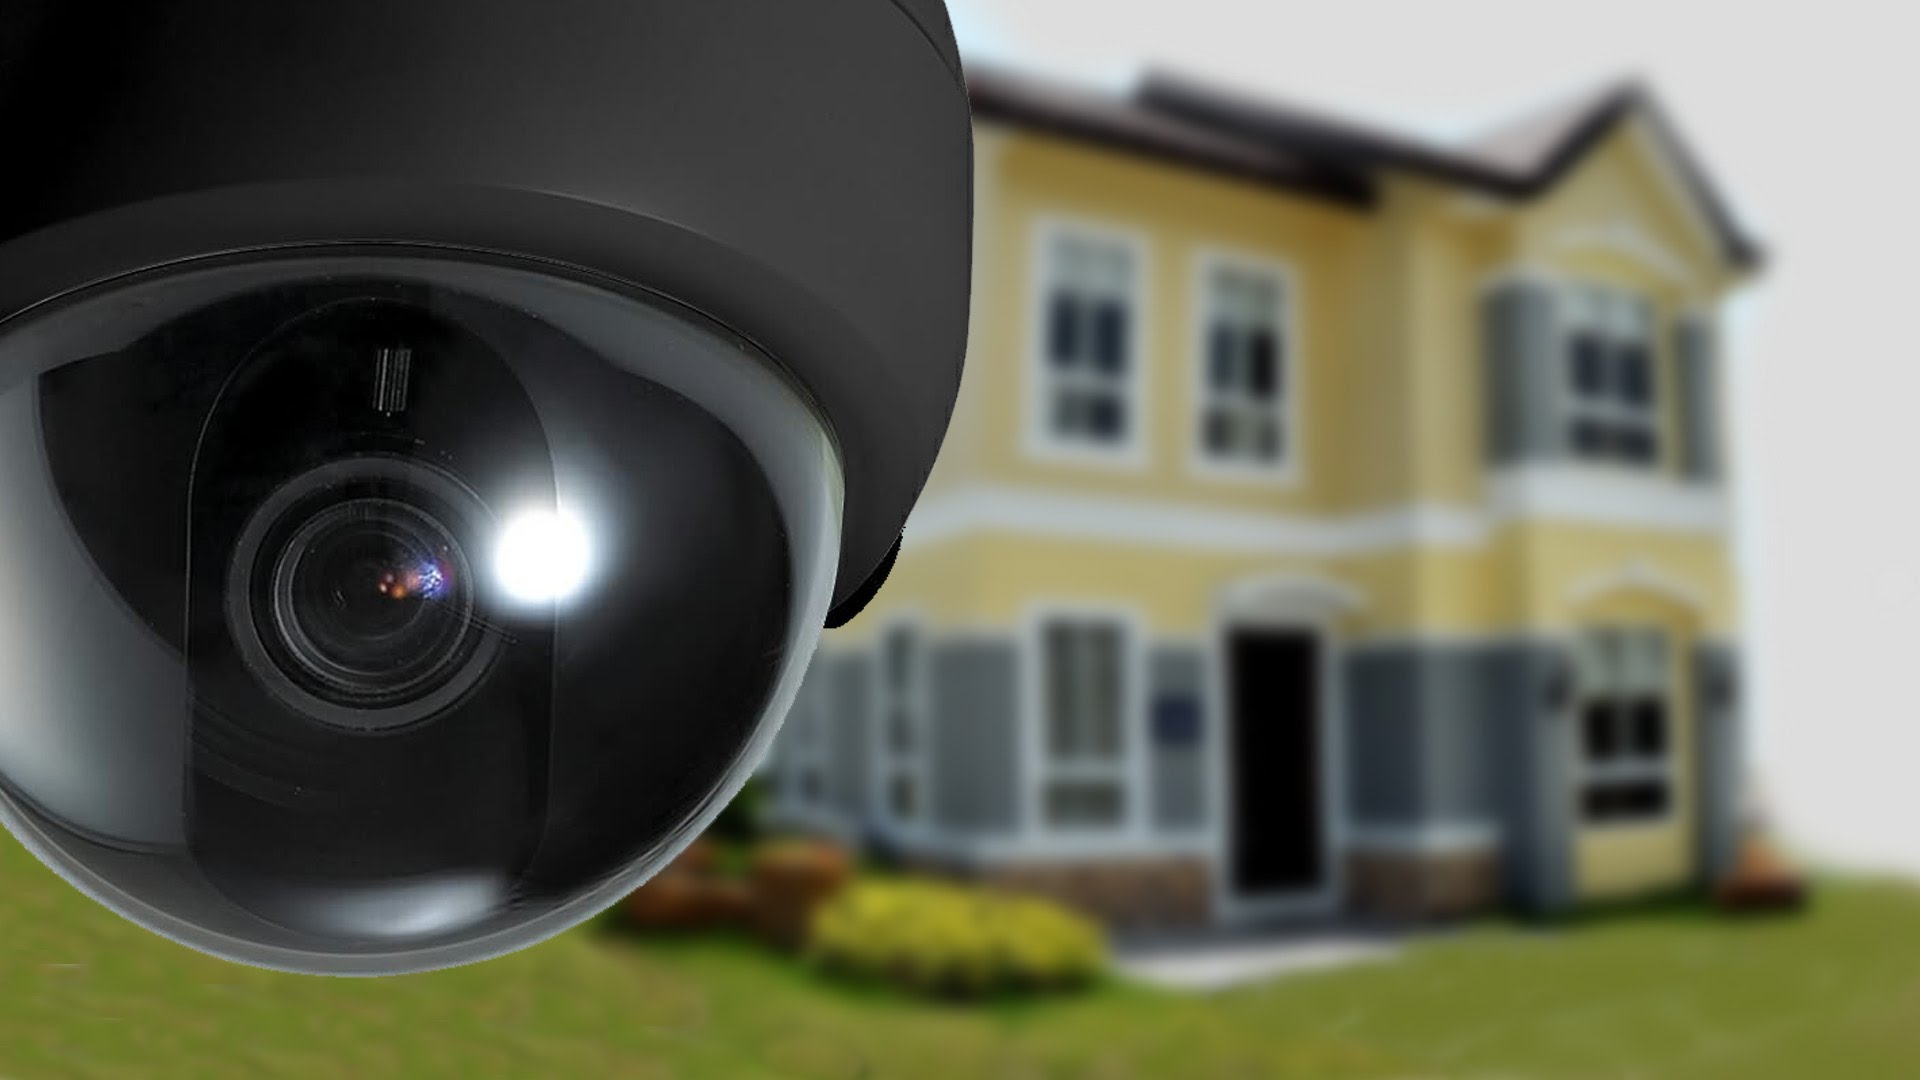 What are important selection parameters for a reliable home security system